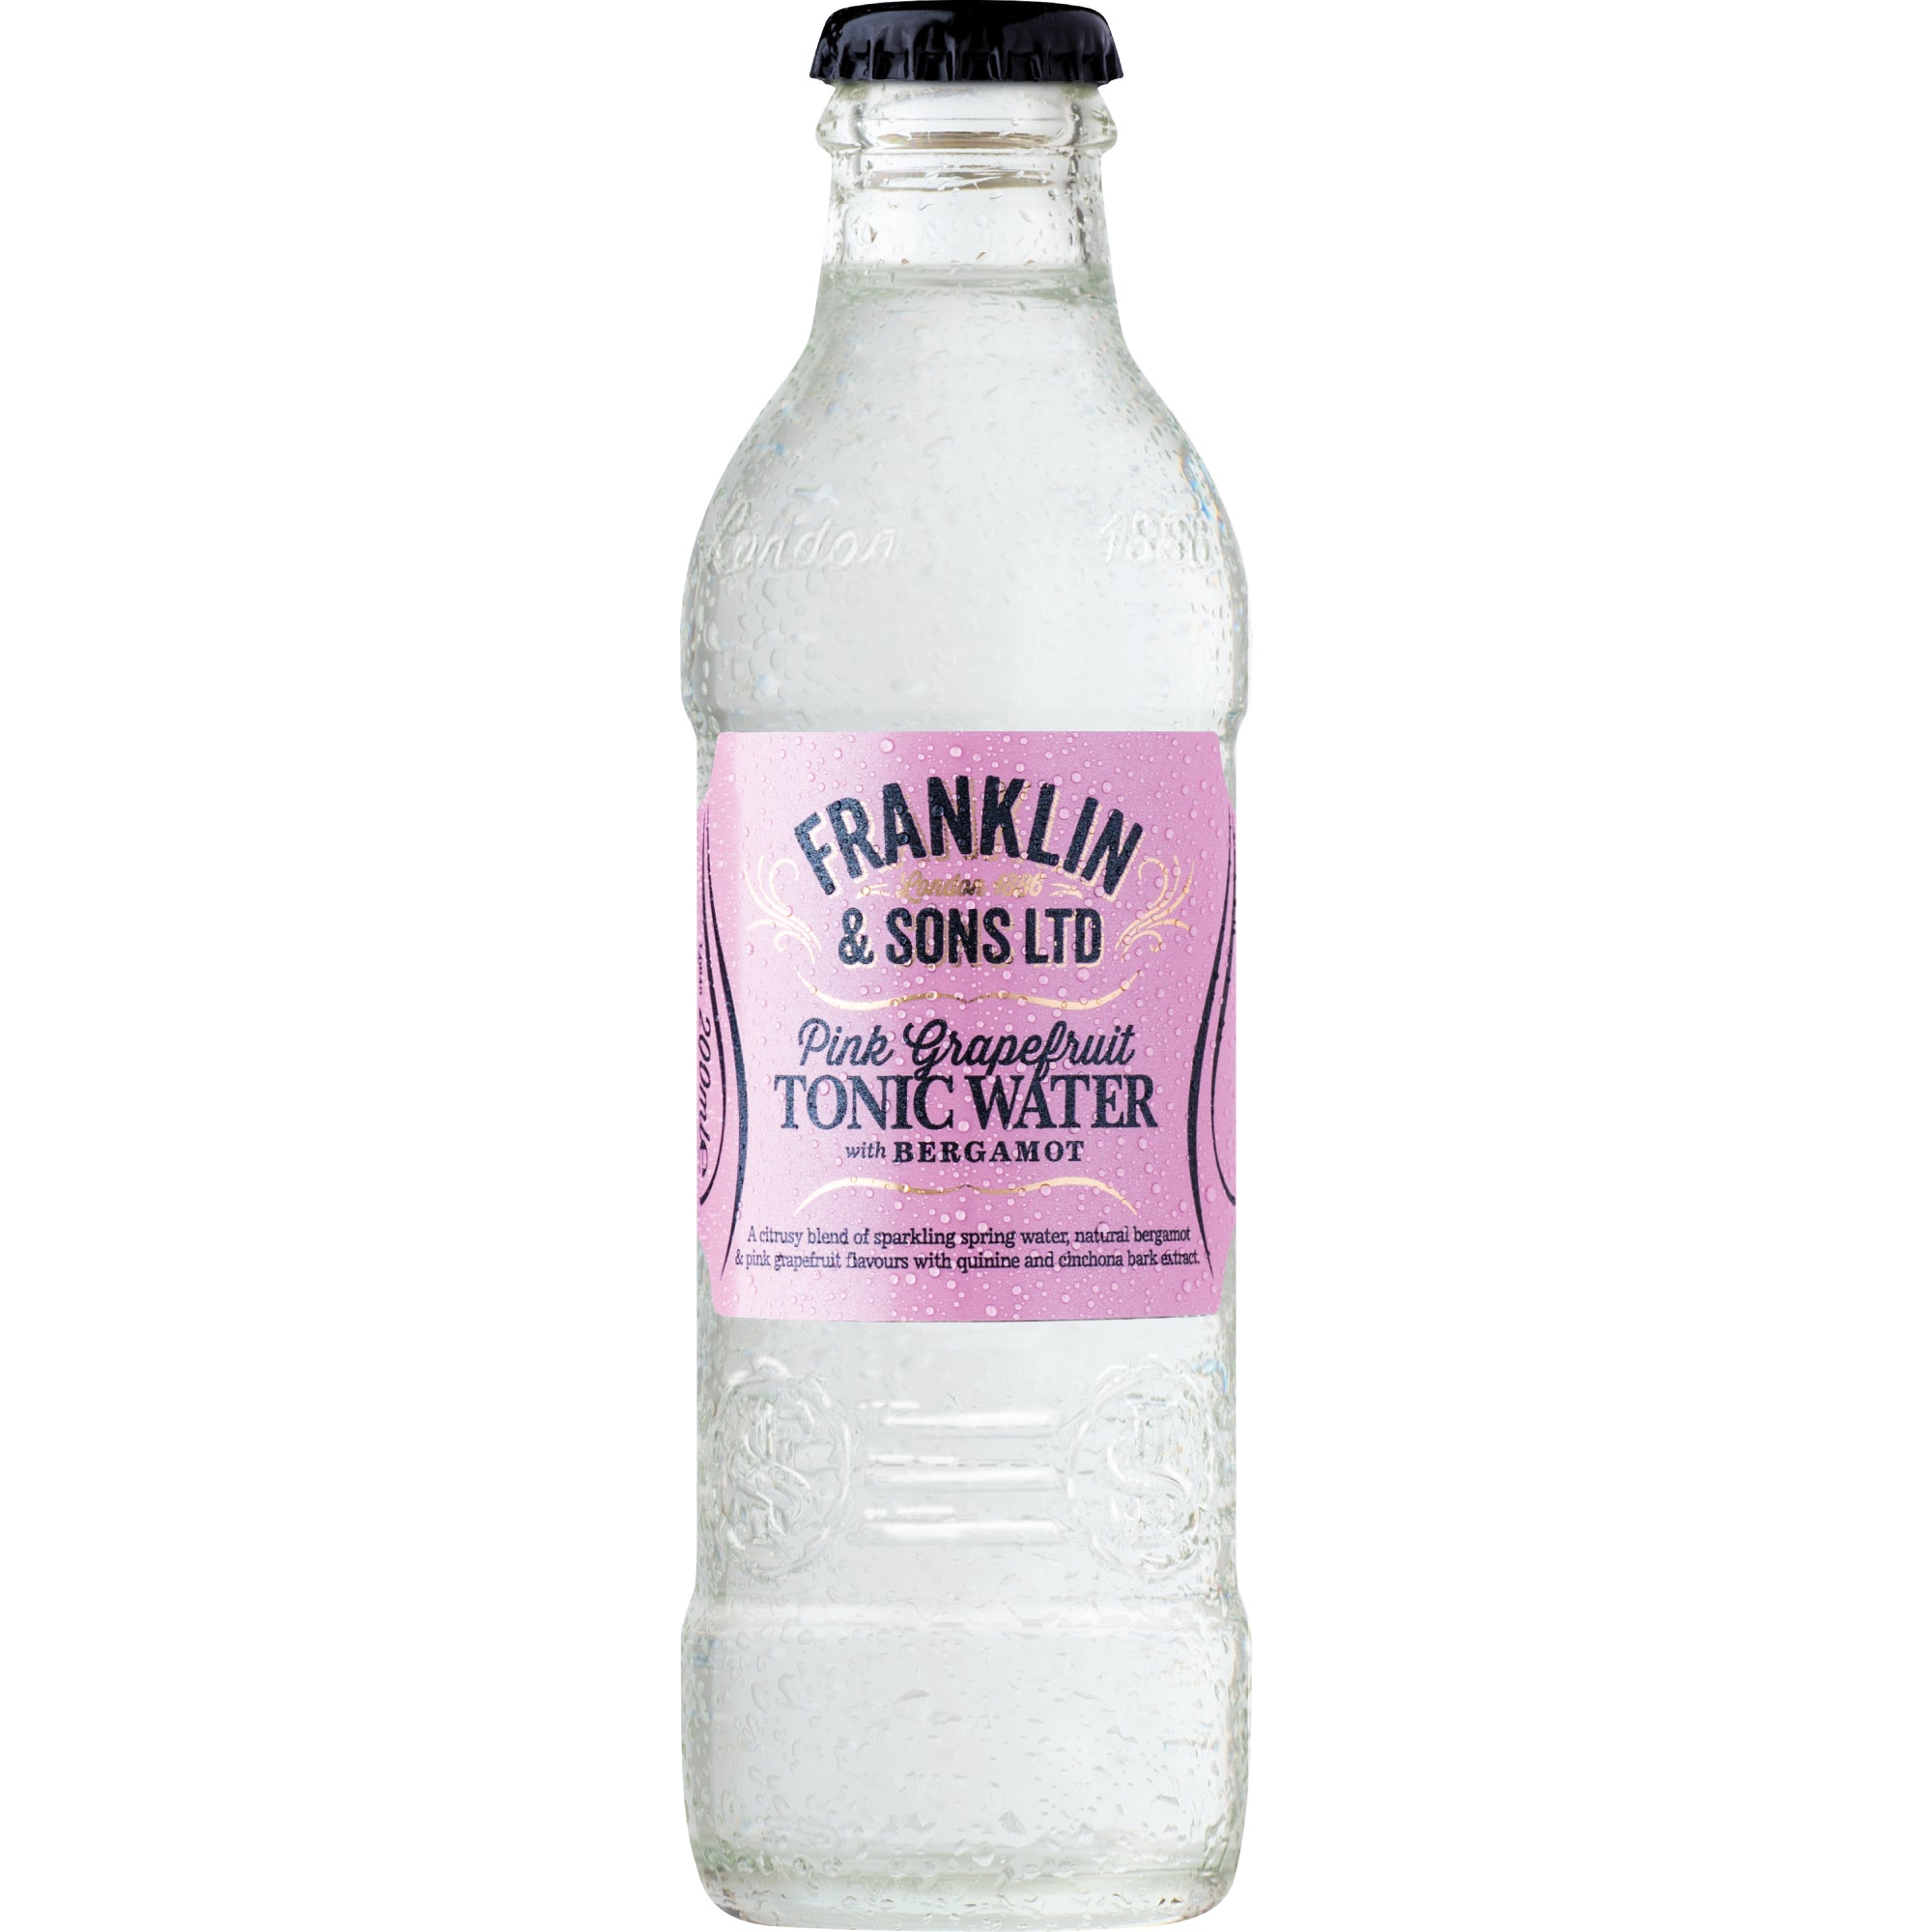 Franklin & Sons Tonic Water (Case of 24 x 200 mL) - Pink Grapefruit Tonic Water